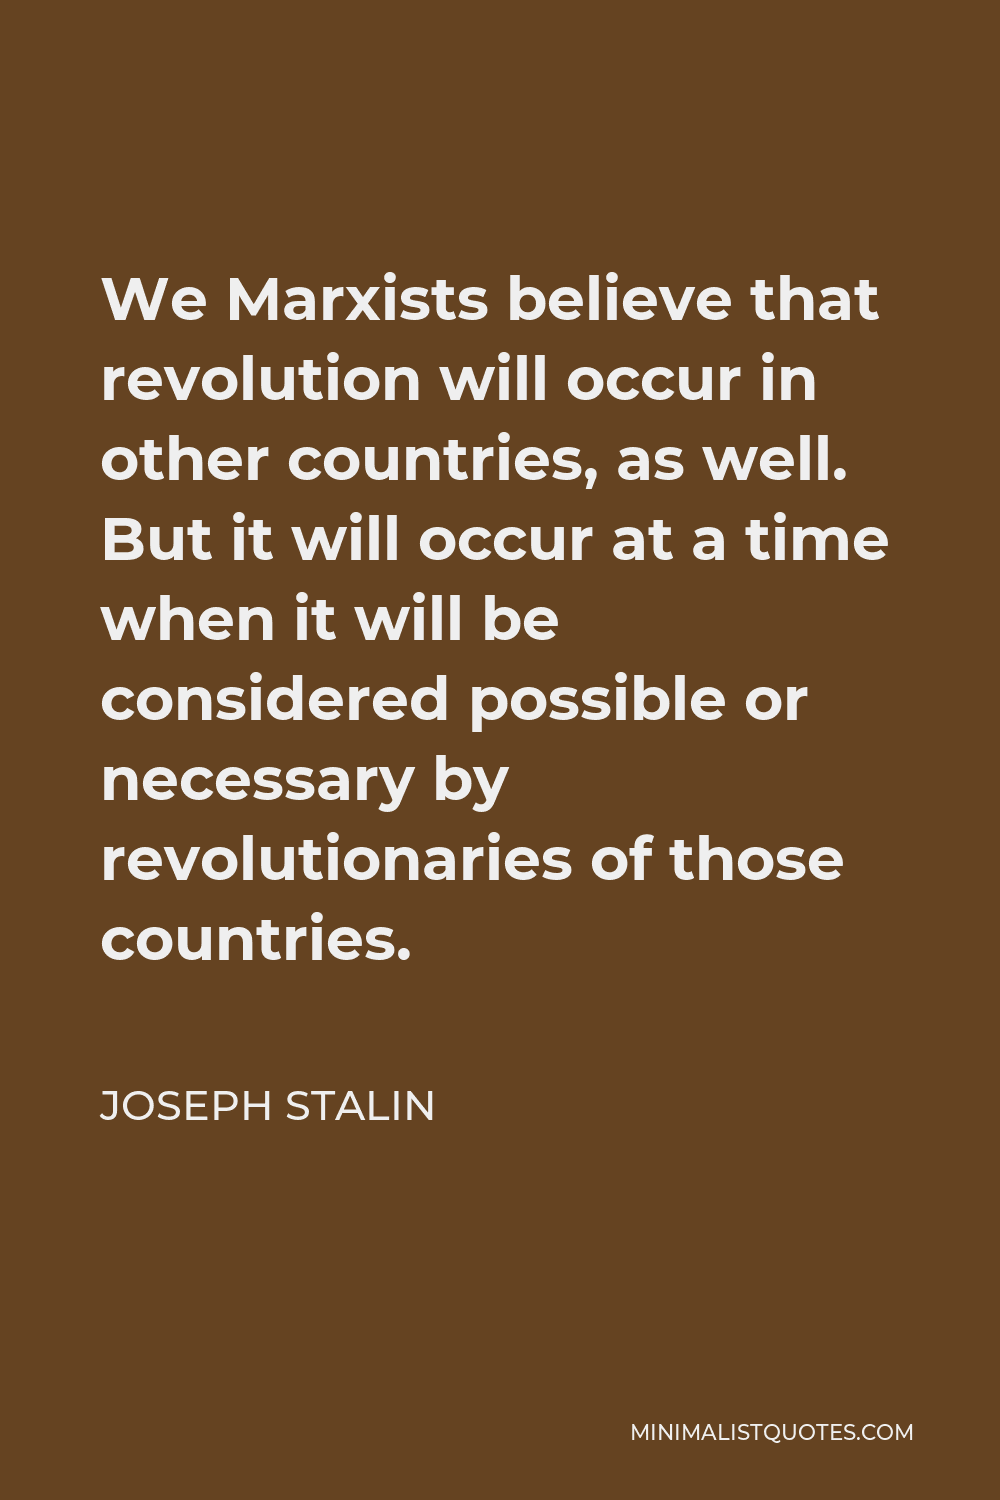 Joseph Stalin Quote - We Marxists believe that revolution will occur in other countries, as well. But it will occur at a time when it will be considered possible or necessary by revolutionaries of those countries.